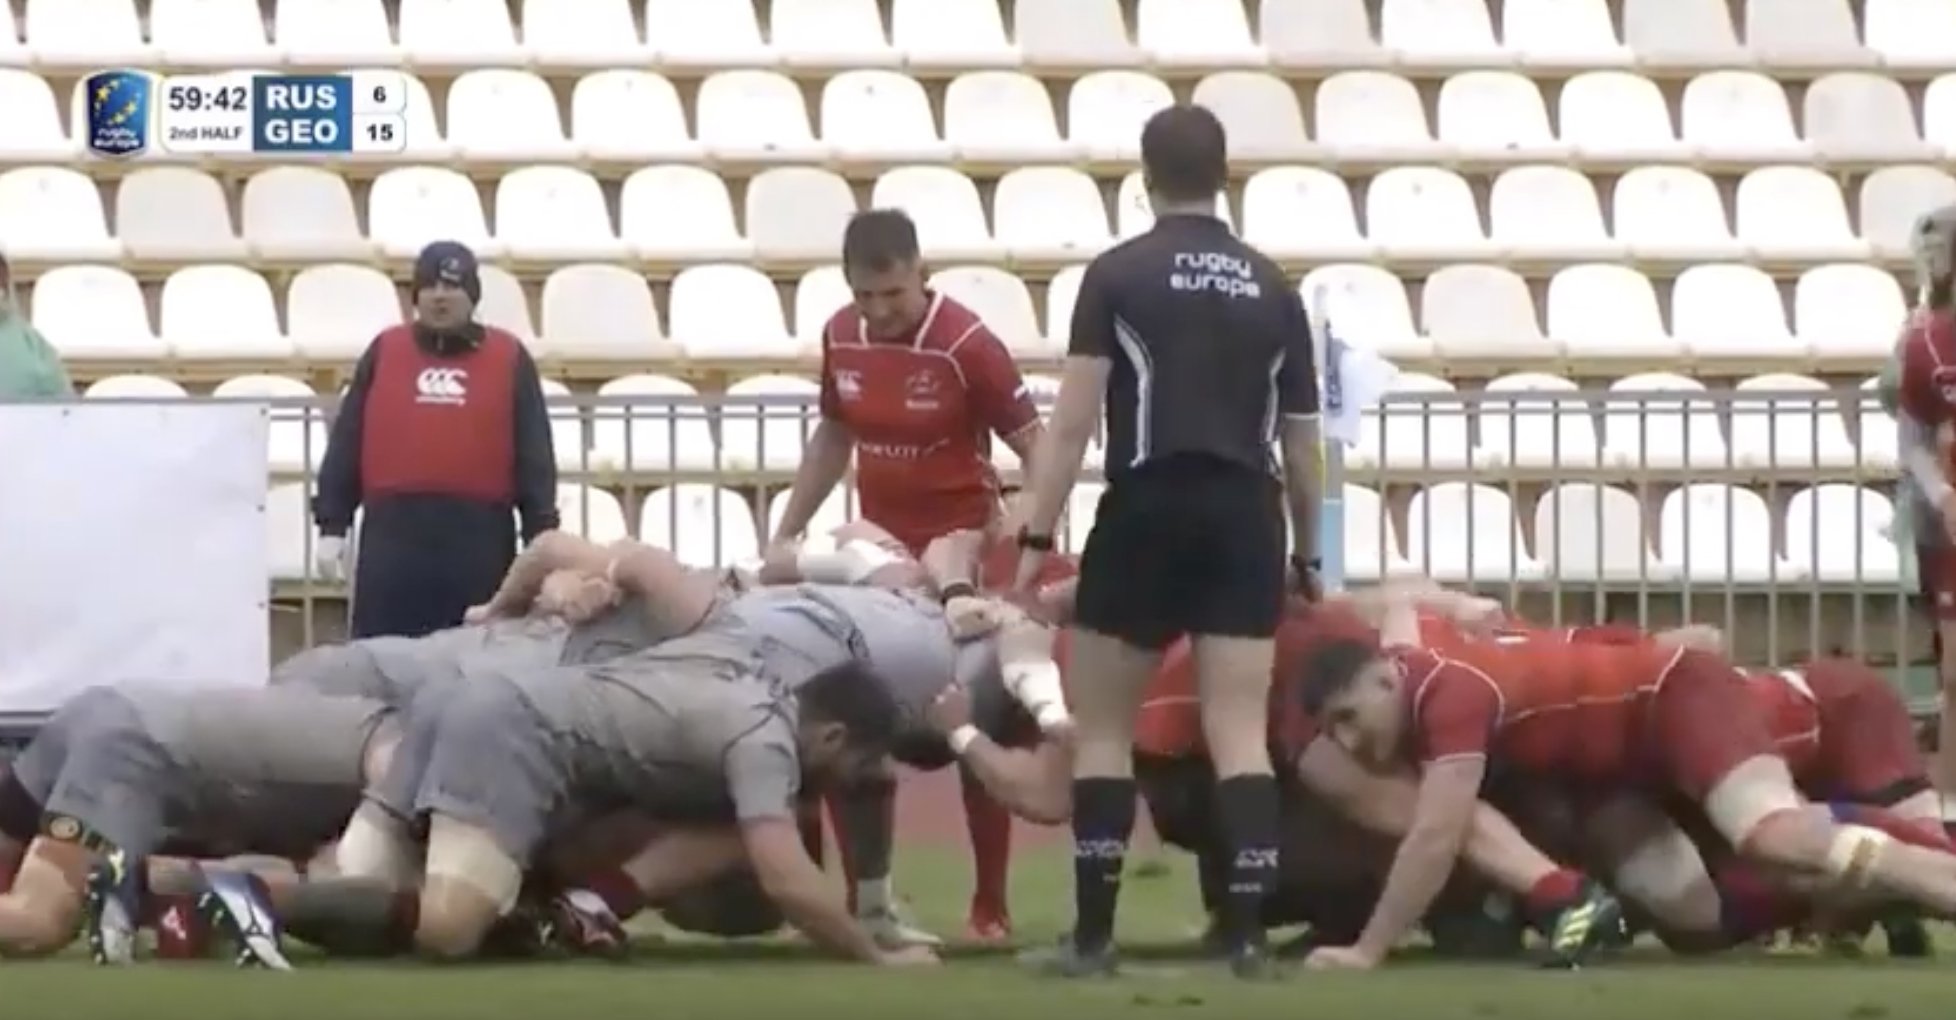 WATCH: The Georgian scrum has taken another victim. This time it's Russia.